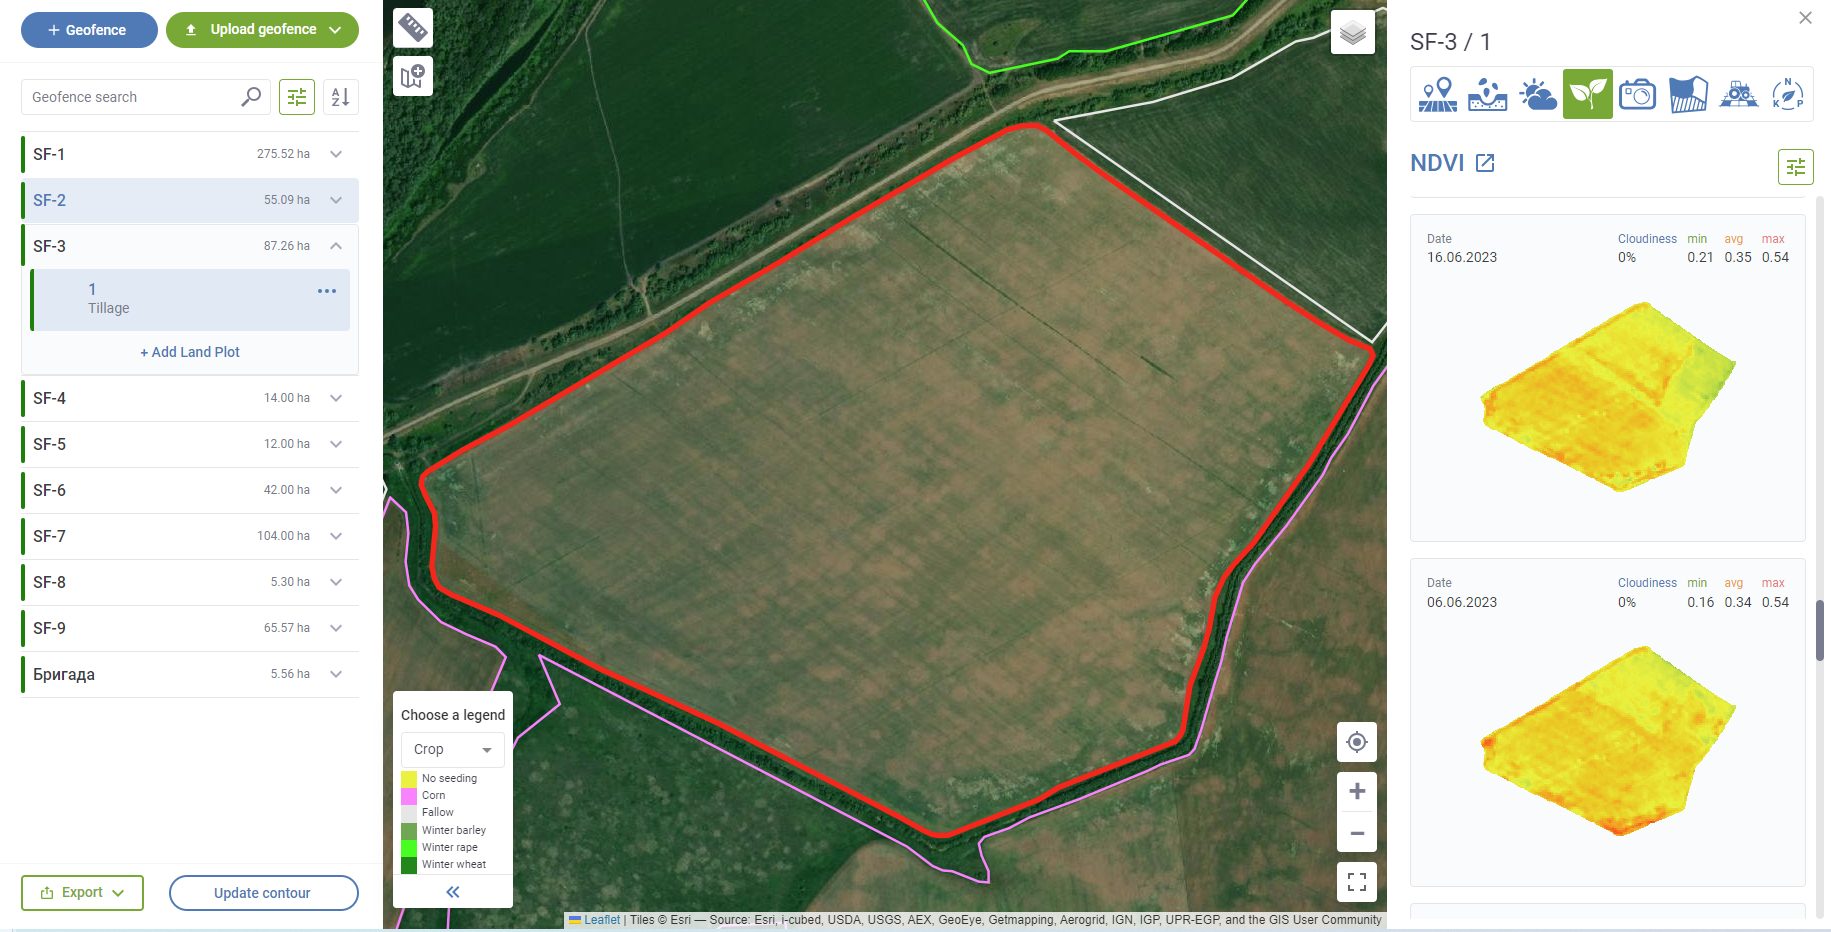 Measuring field area is the first step towards precision agriculture